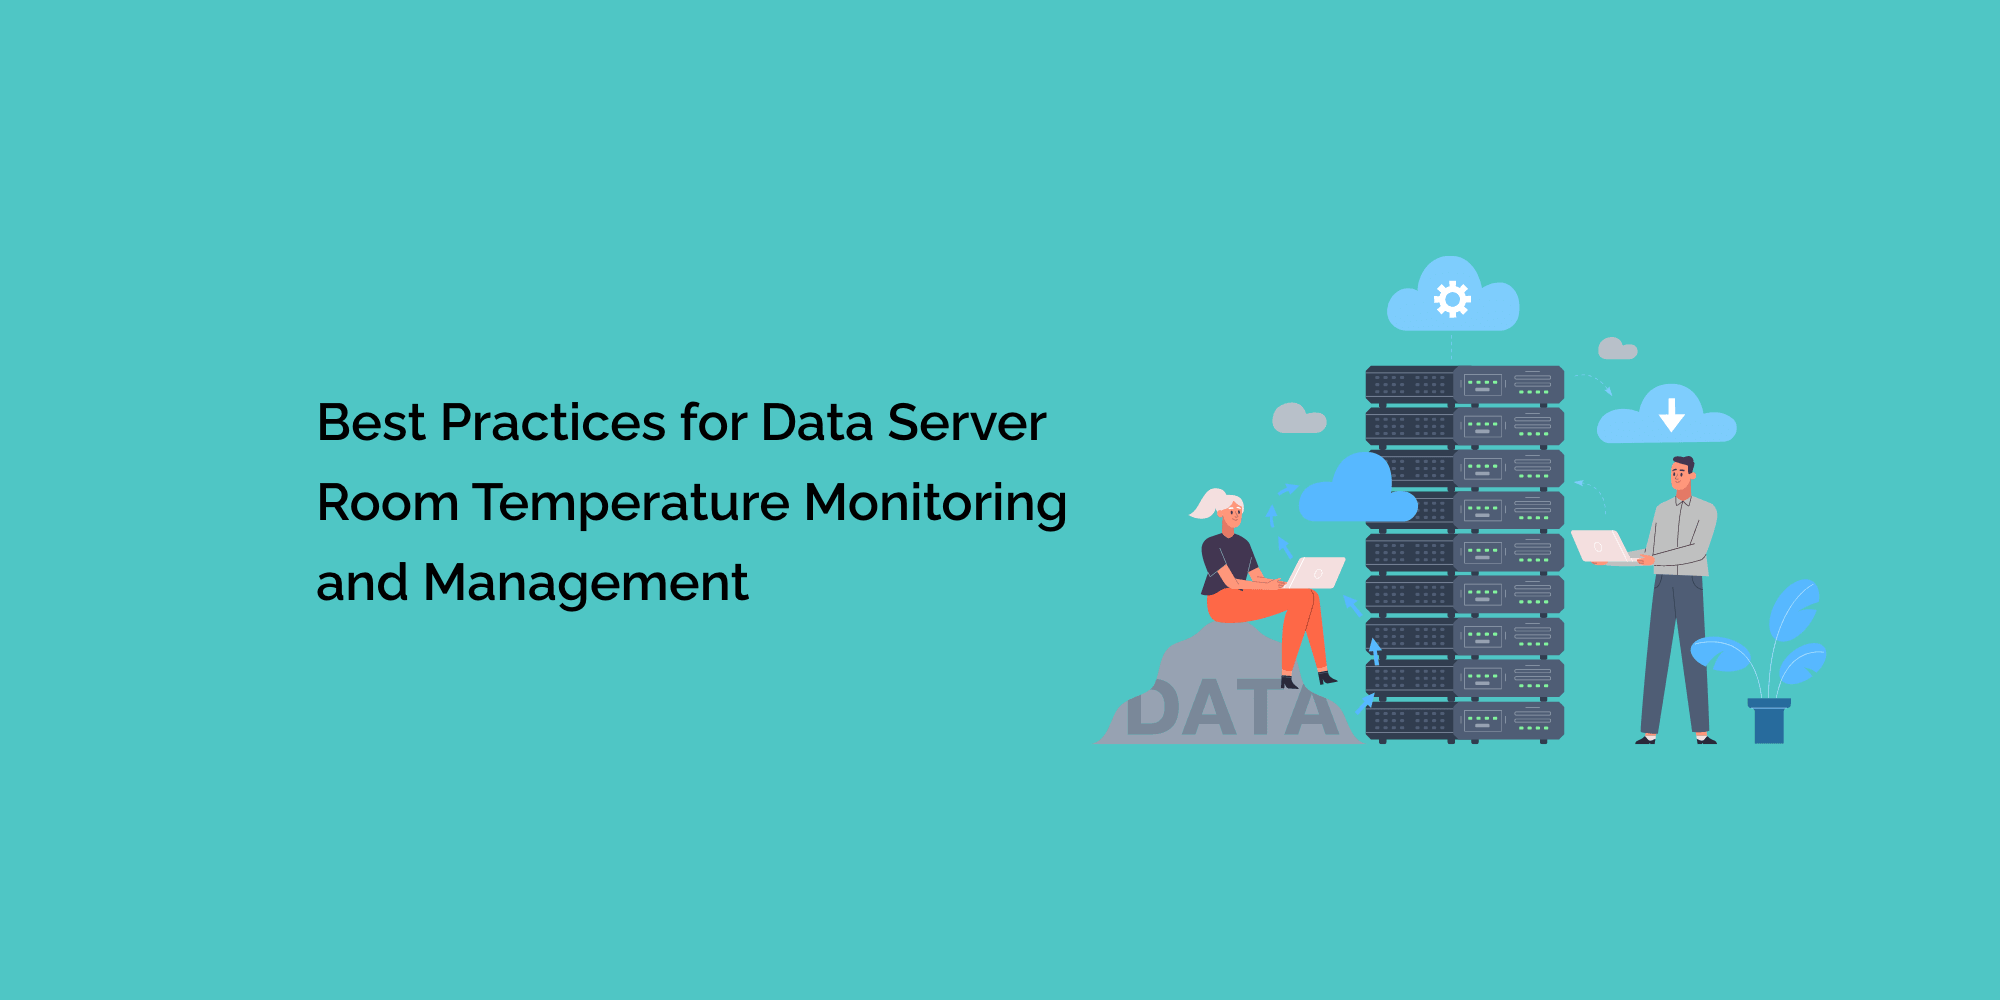 Best Practices for Data Server Room Temperature Monitoring and Management